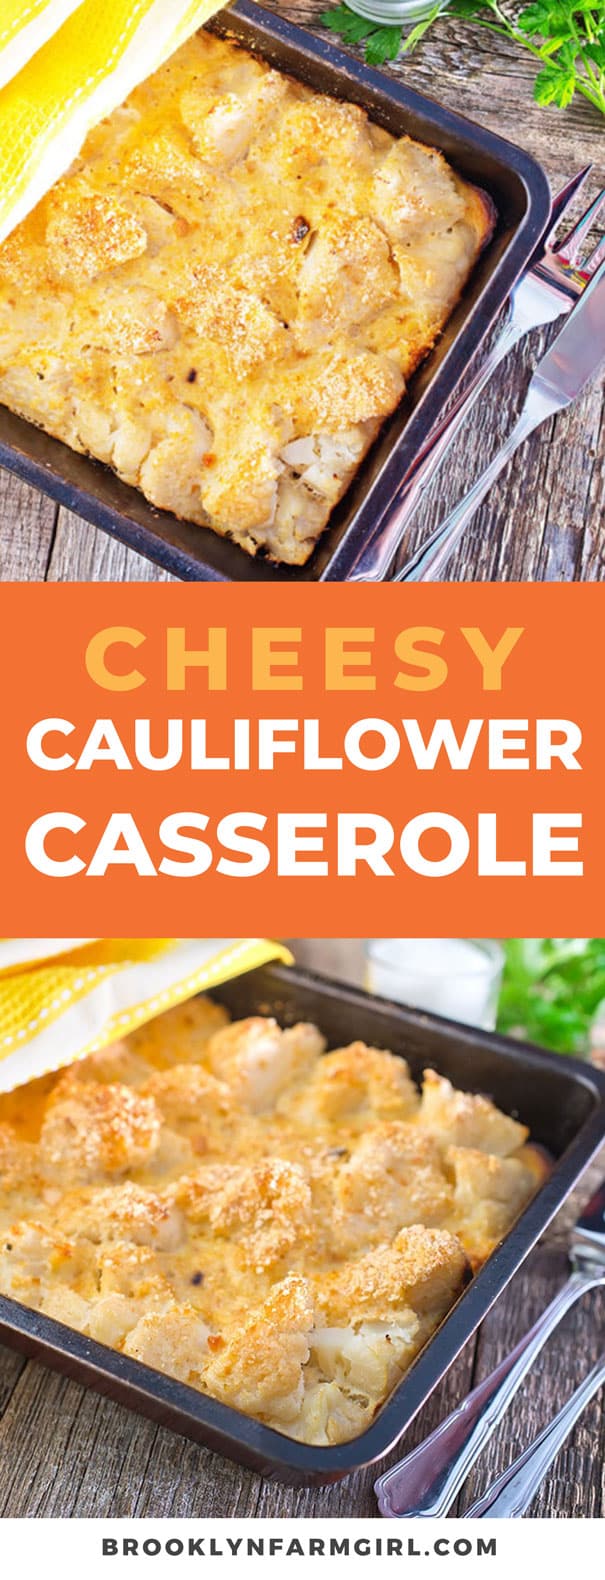 Easy Cheesy Cauliflower Casserole is delicious and only takes 10 minutes to prepare! This loaded casserole recipe is made with Cheddar and Parmesan to make it extra cheesy!  My family declares it one of their favorite side dishes on the holiday table! Low carb friendly. 